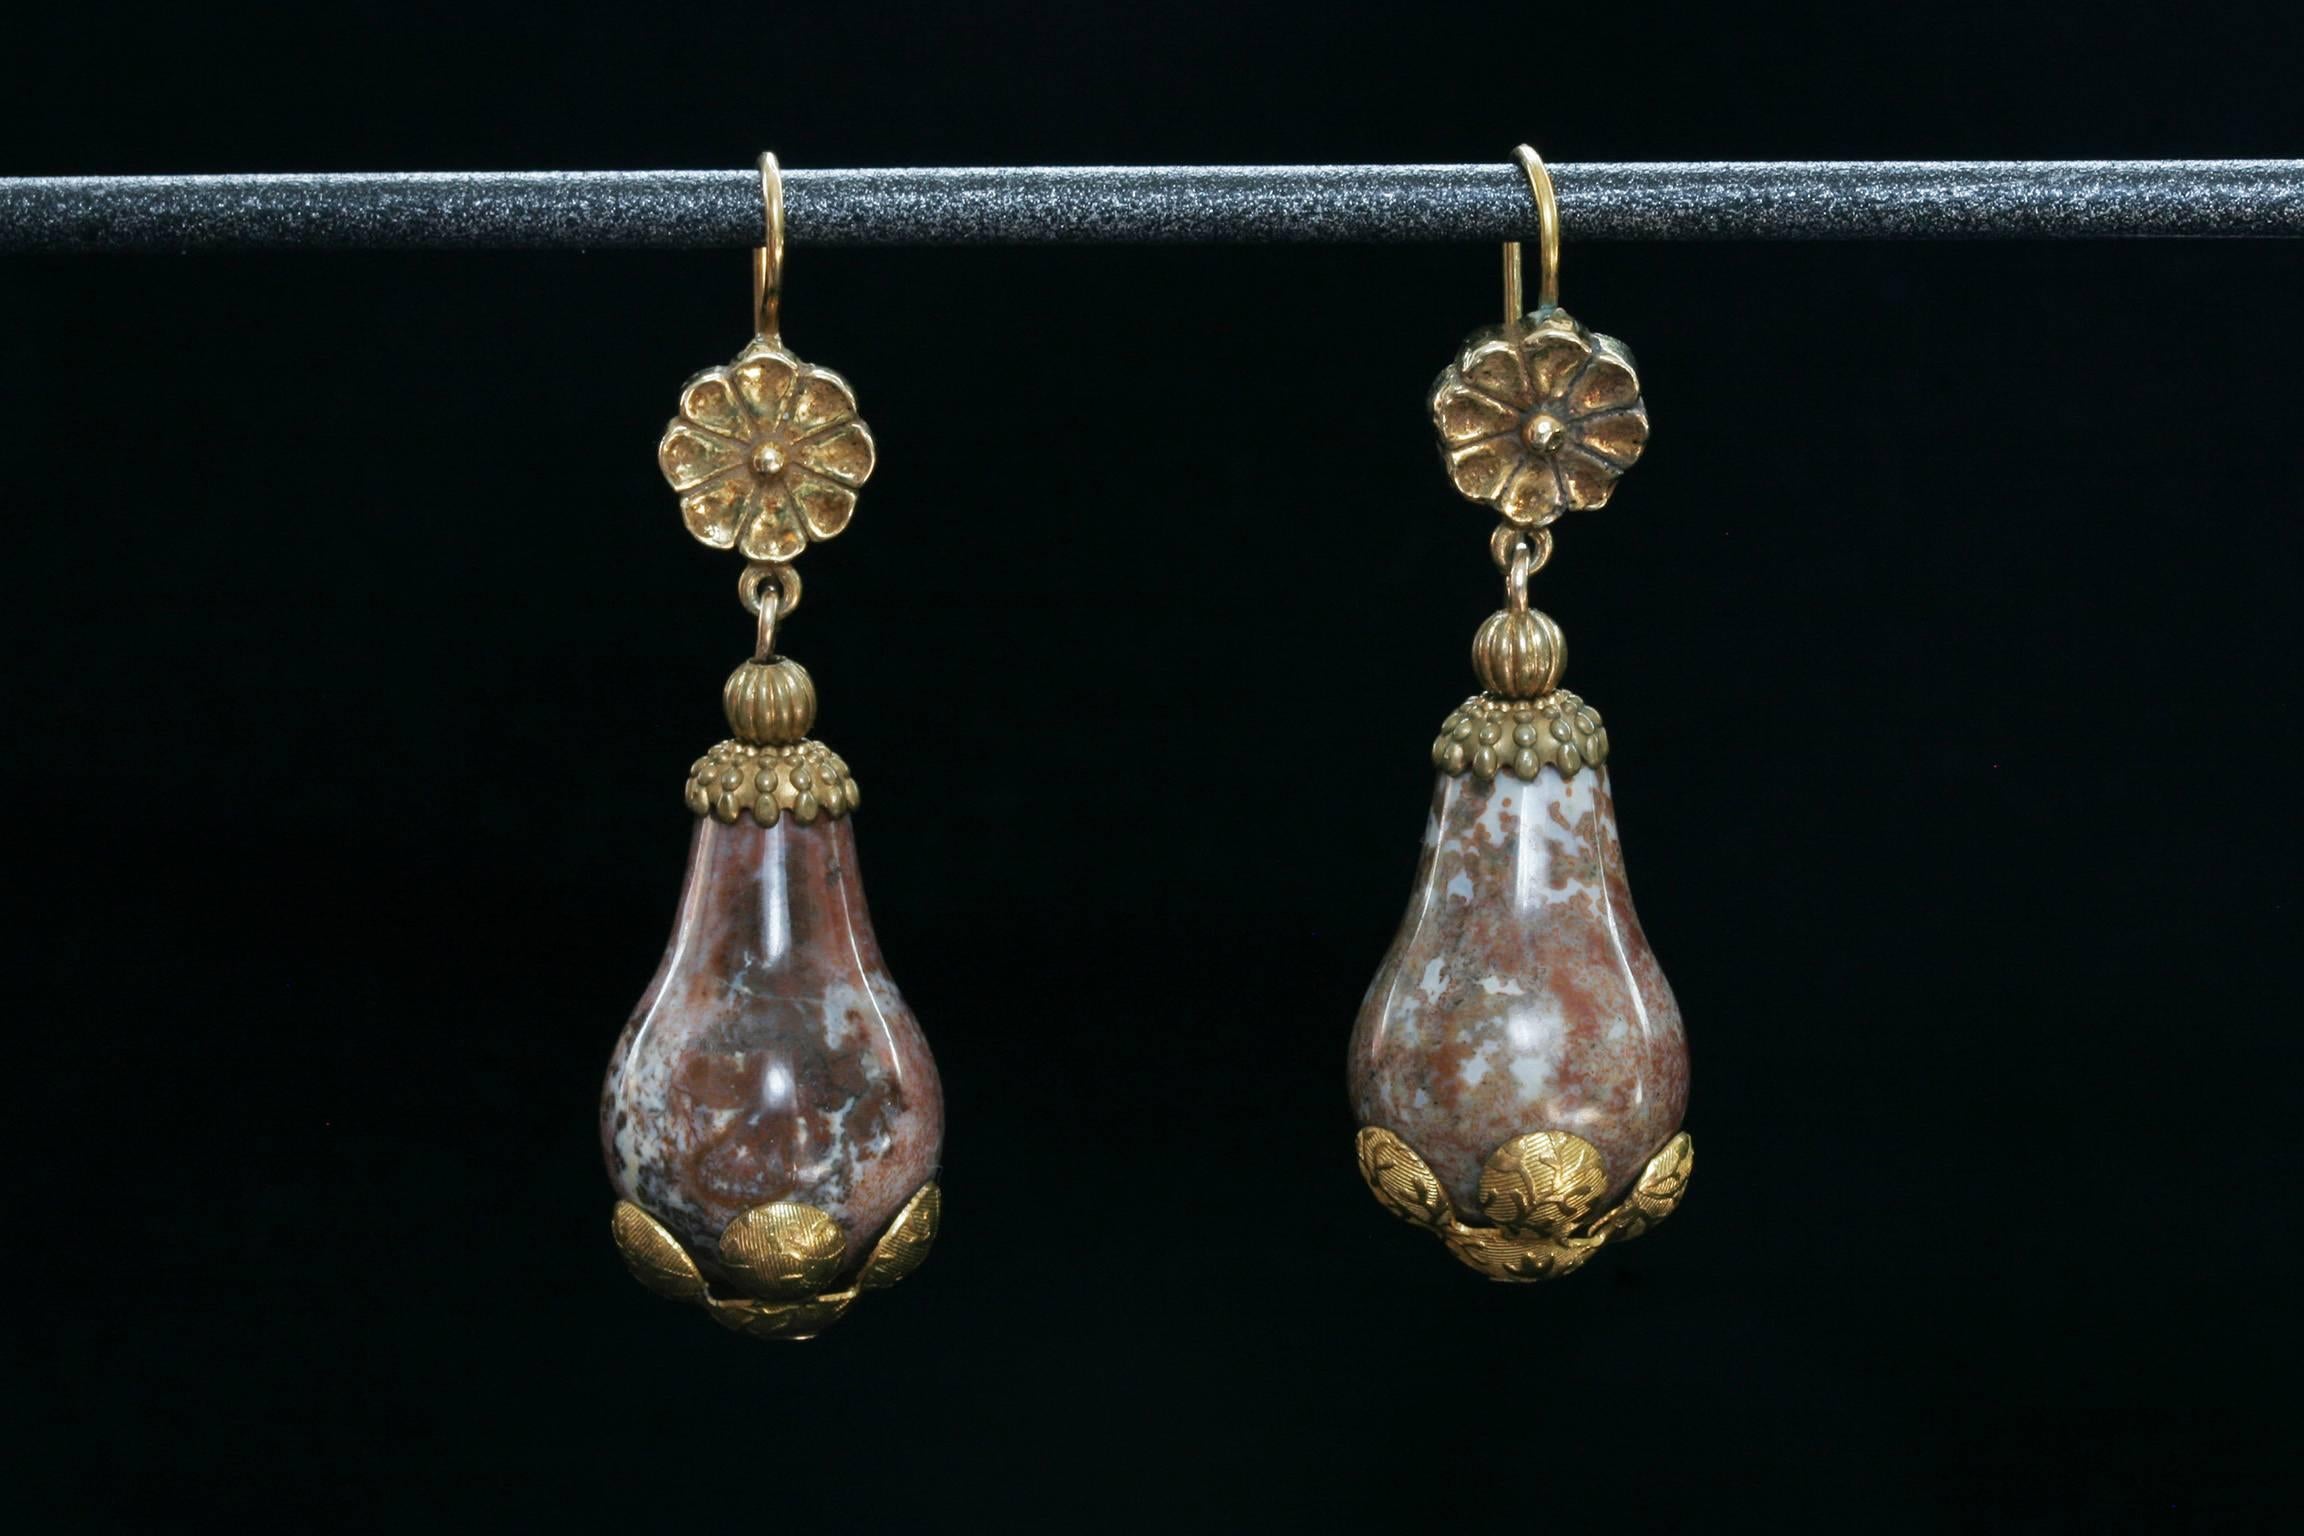 A pair of early Victorian carved agate and pinchbeck earrings. Hand-hammered flower petals wrap the bottom of the agate drop, and the top is accentuated with petite flowers. The earrings are in good condition.

Total Drop: Approximately 1.75”